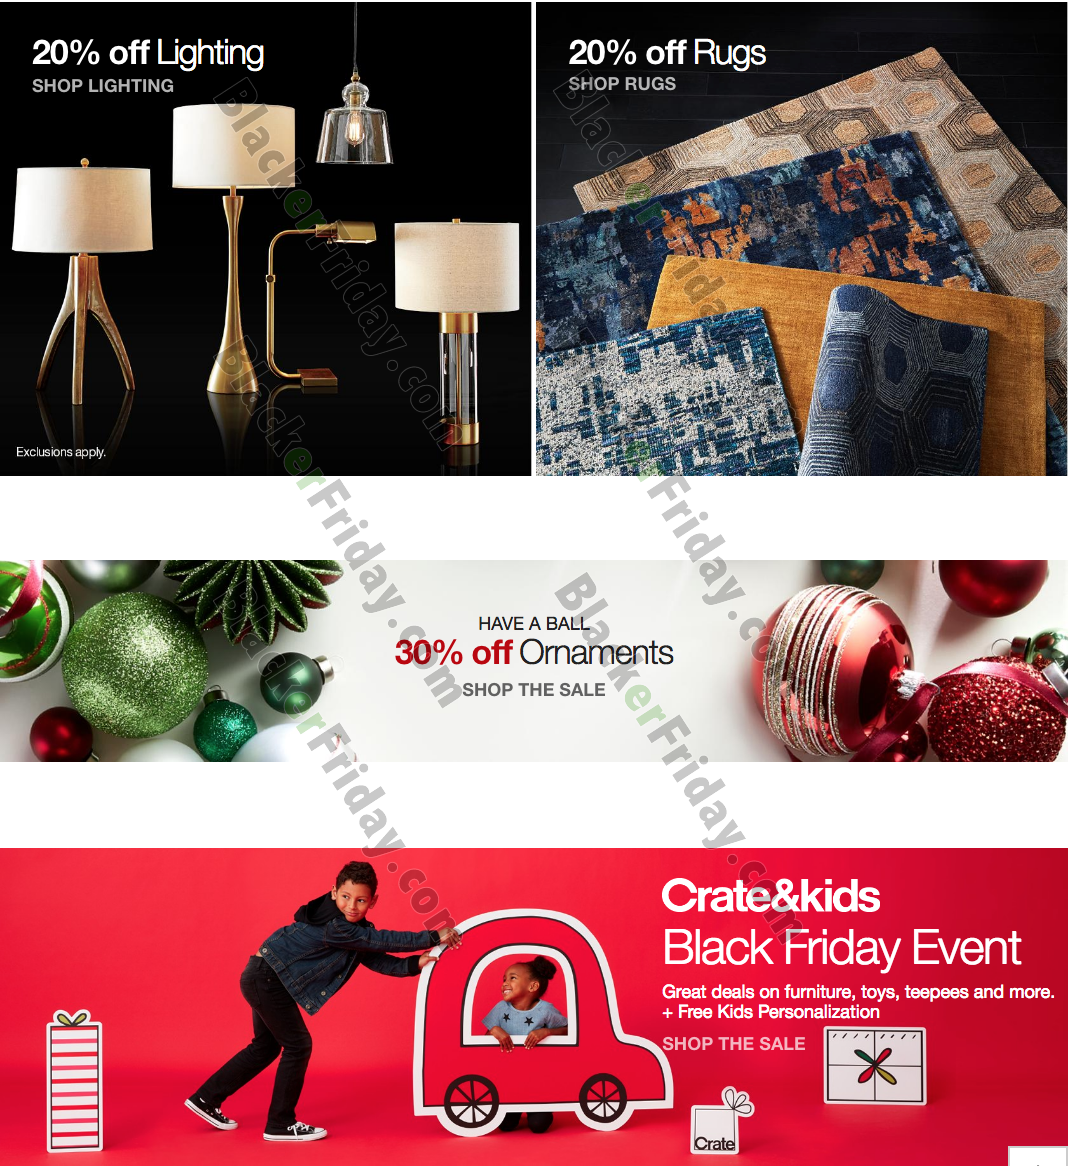 Crate & Barrel Black Friday 2021 Sale - What to Expect - Blacker Friday - Does Vistaprint Have Black Friday Deals